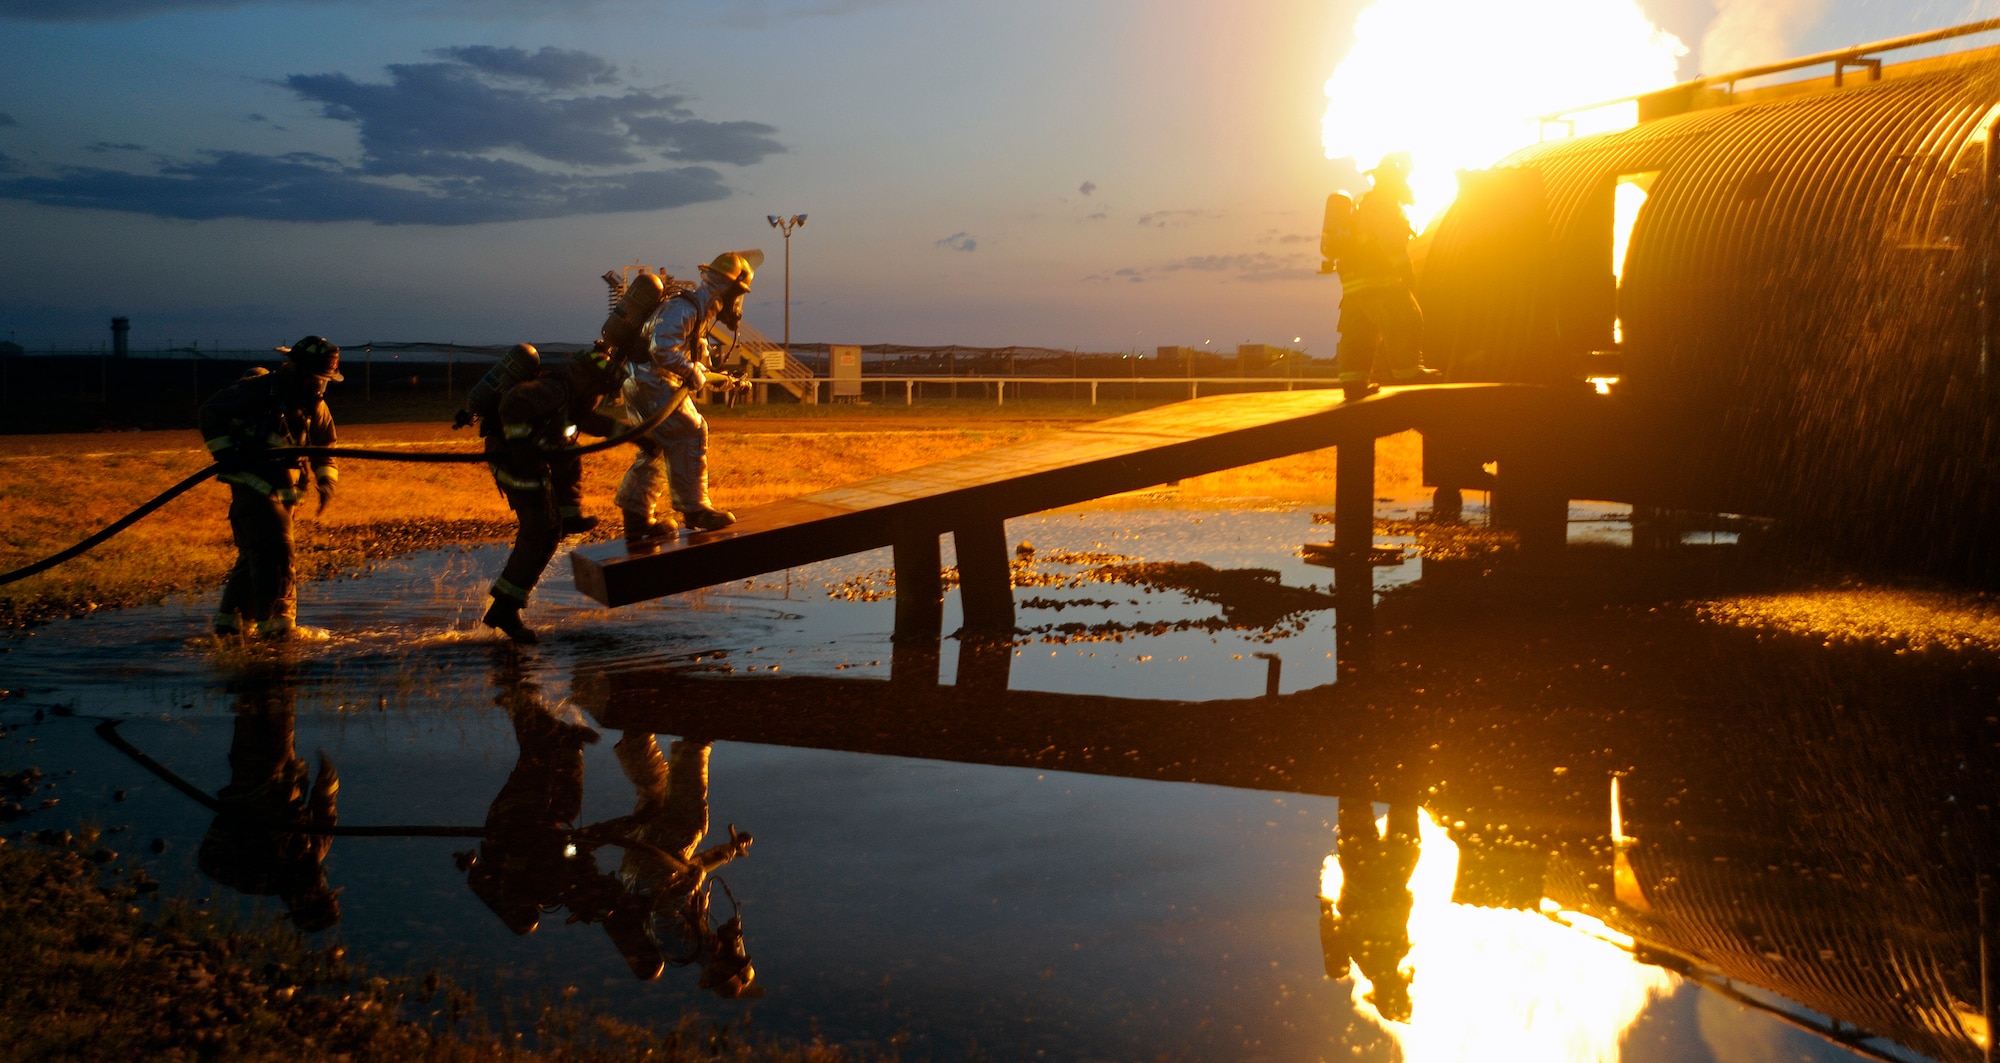 Fairchild Firemen approach the simulated aircraft fire at Fairchild Air Force Base, Wash., July 10, 2012. The firefighters are required to enter the aircraft and contain the fire. (U.S. Air Force photo by Airman 1st Class Ryan Zeski)